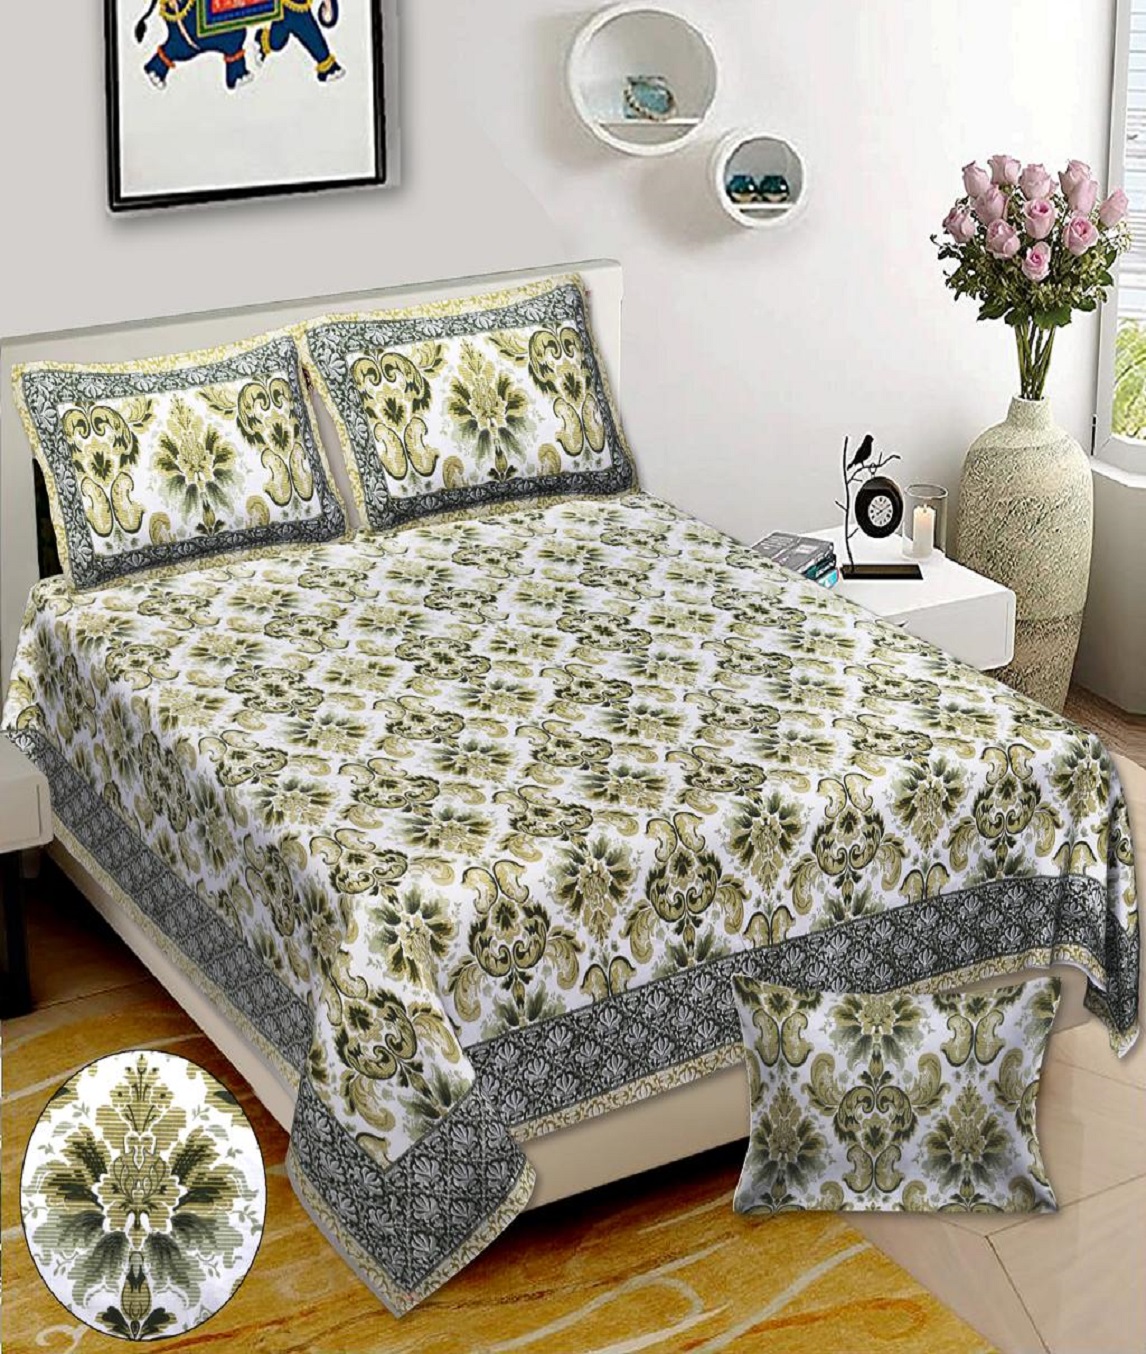 Jumbo size bedsheets with 2 pillow covers